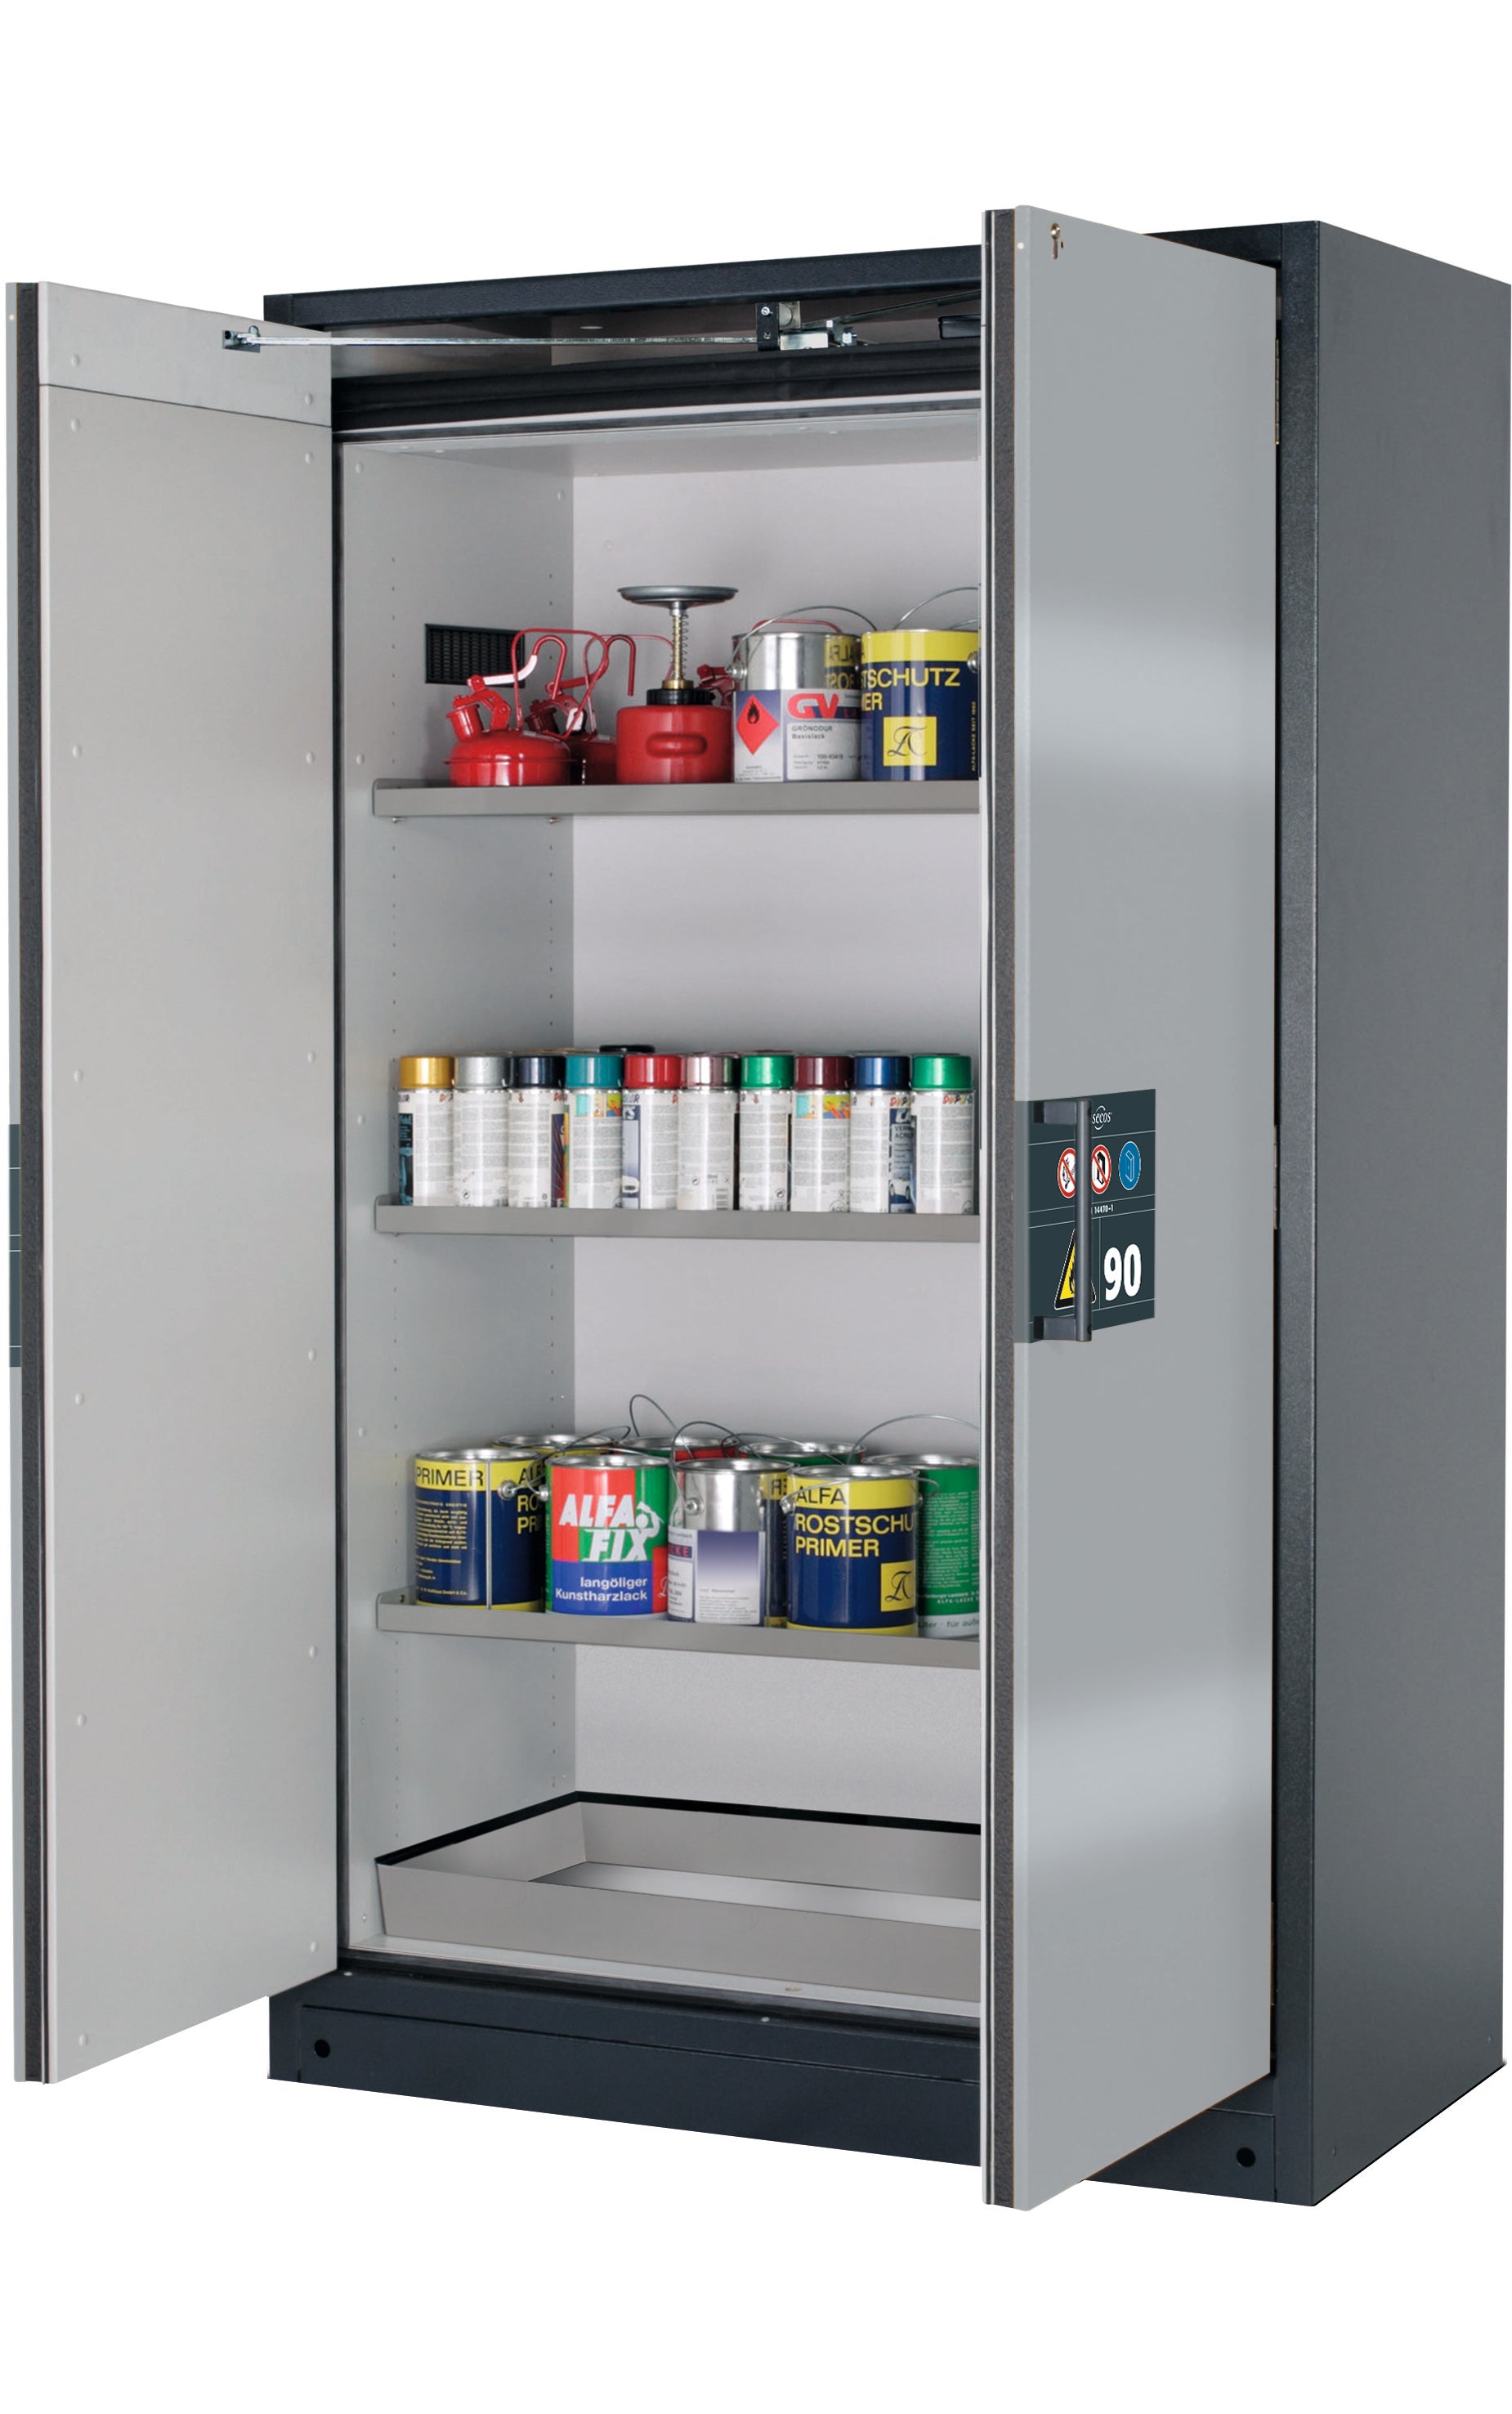 Type 90 safety storage cabinet Q-PEGASUS-90 model Q90.195.120.WDAC in asecos silver with 3x shelf standard (stainless steel 1.4301),